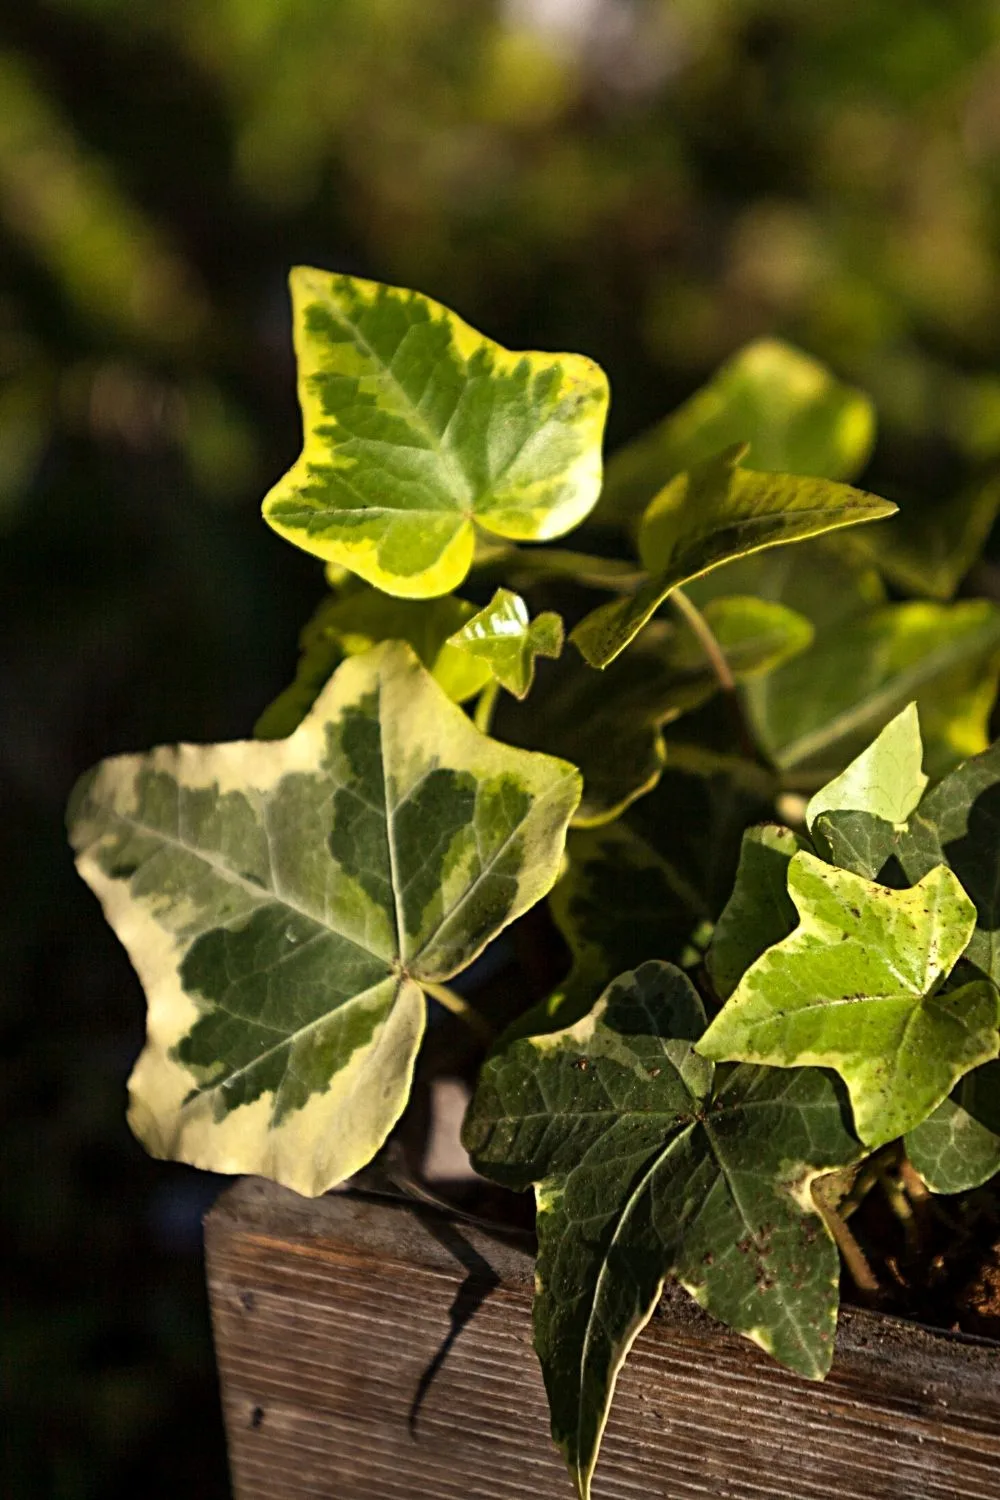 English ivy is a common ivy plant that you can add to your growing northeast-facing window plant collection